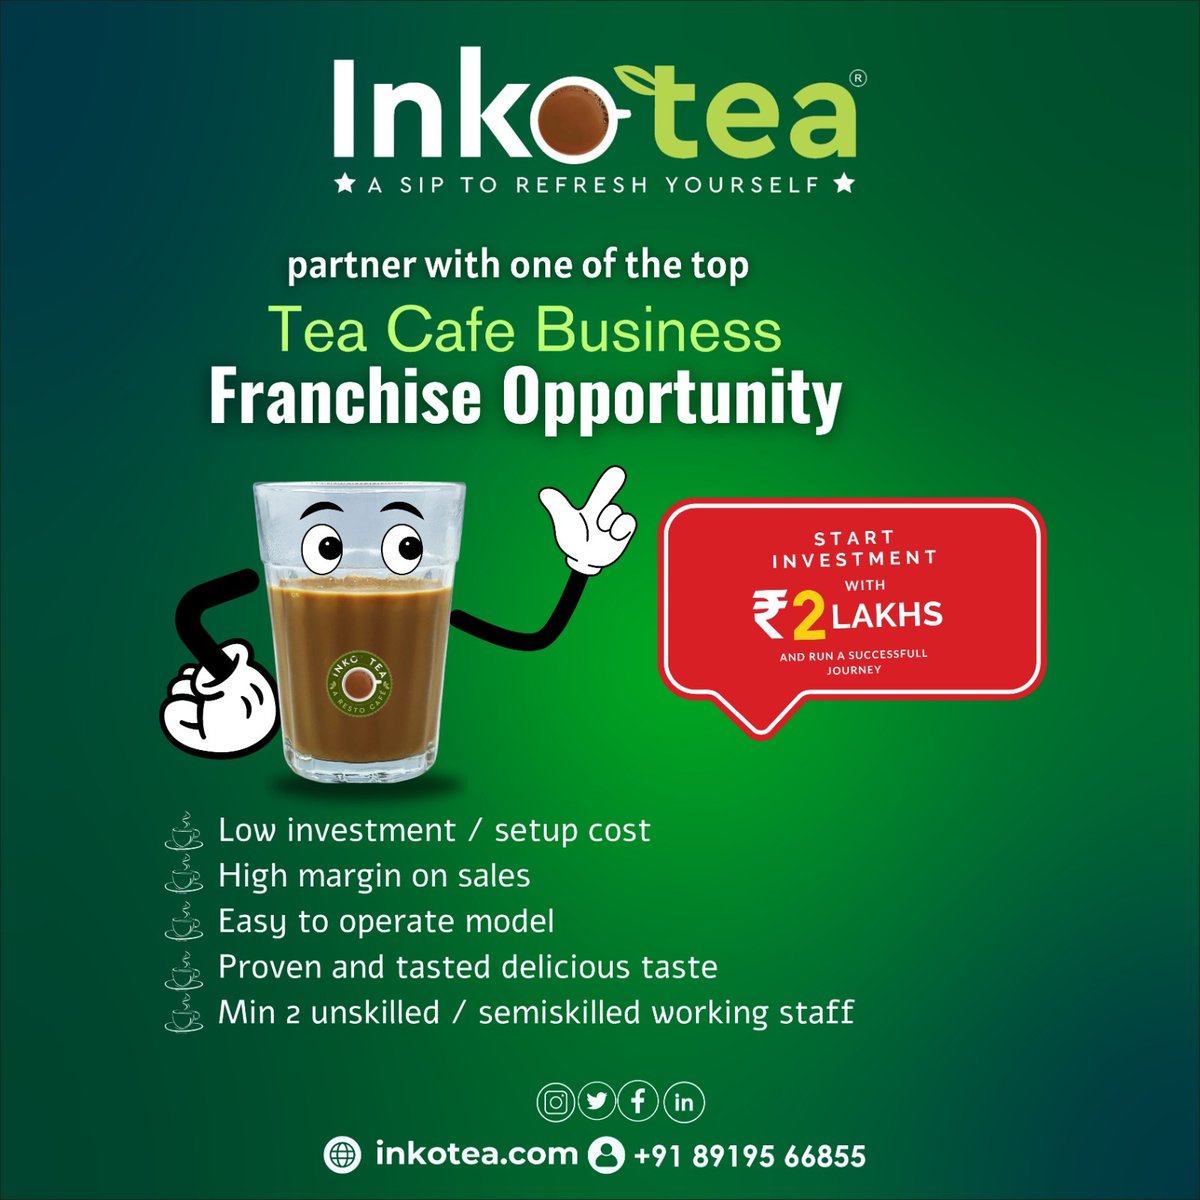 Welcome to Inkotea!

Partner with one of the top Tea Cafe Business Franchise Opportunities and start your investment journey with just 2 lakhs.

#Inkotea #BusinessFranchise #franchisebusiness #teafranchise #hyderabadcafes #teaoutlet #teaaddict #brewtea #tea #rainyseason